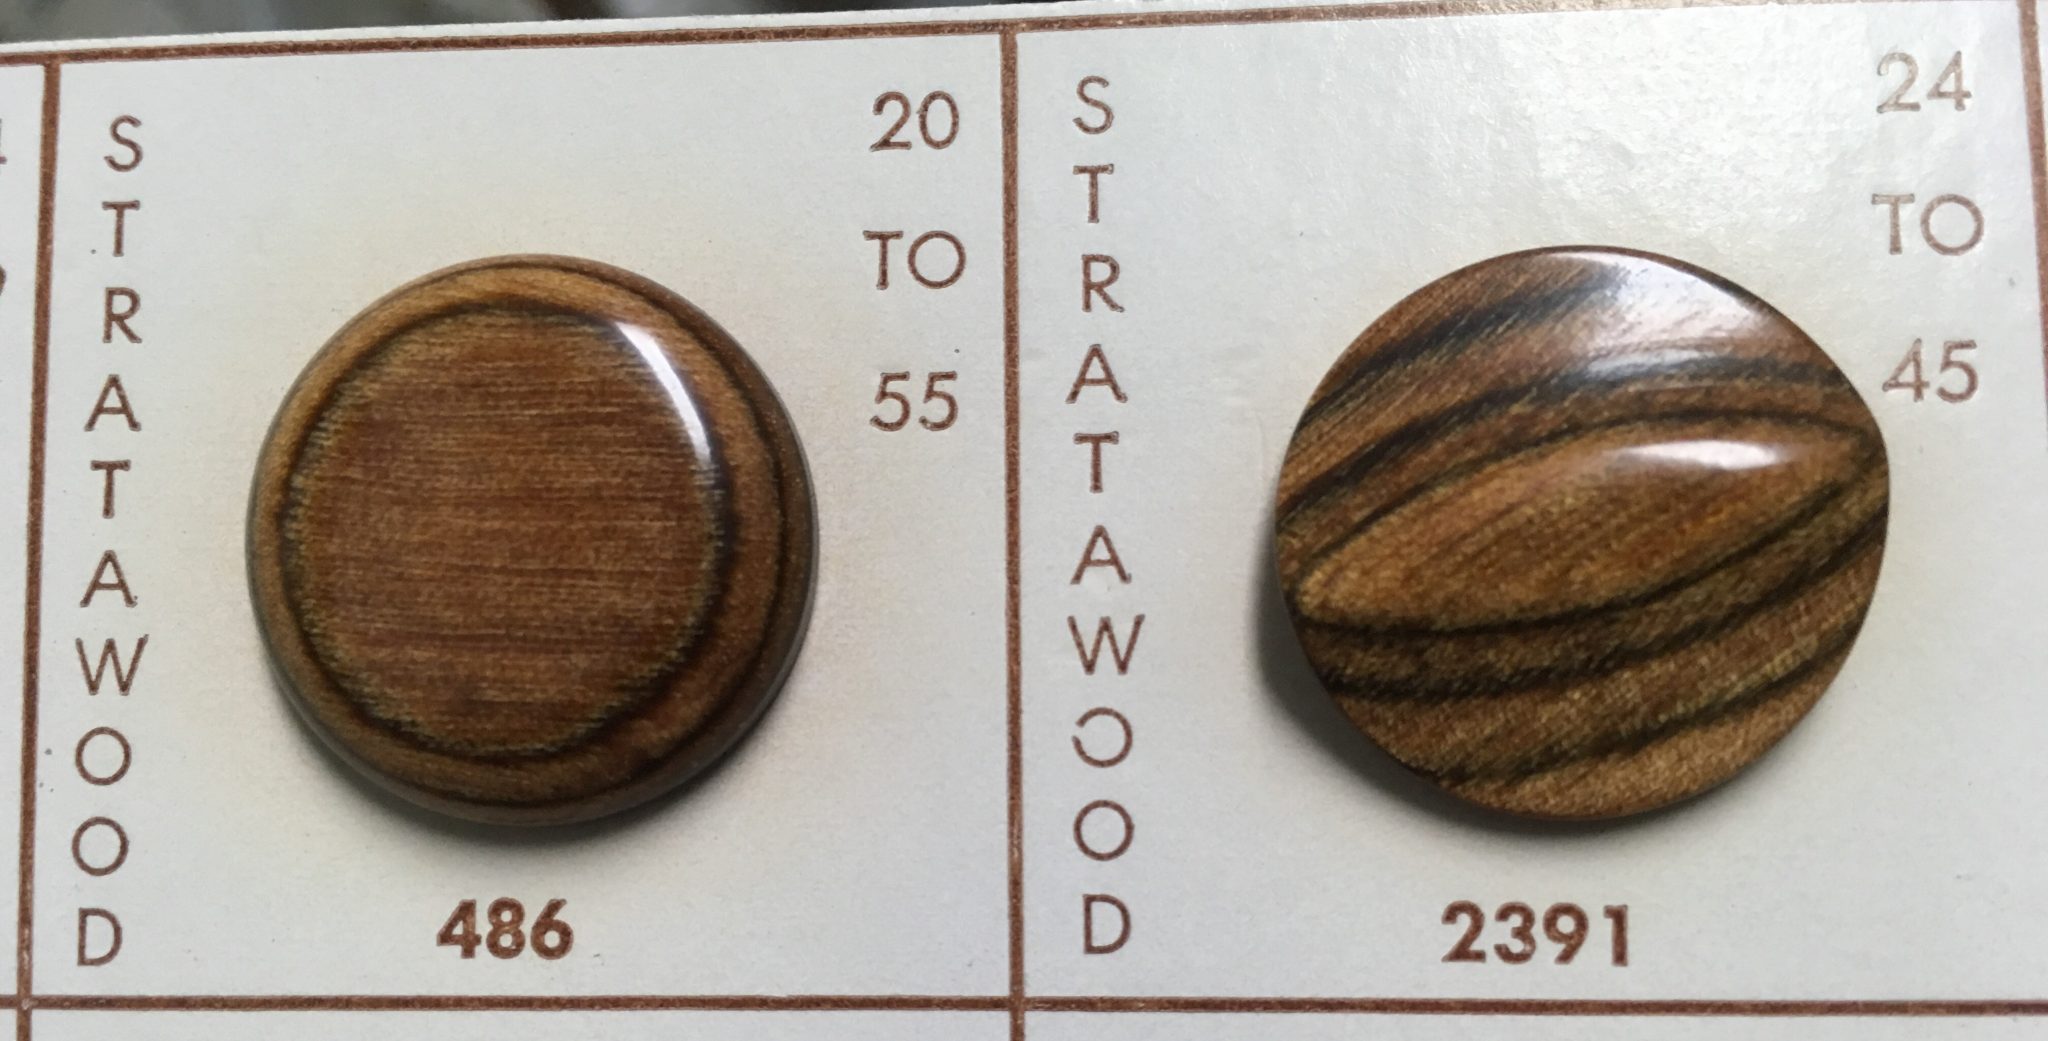 button question: stratawood